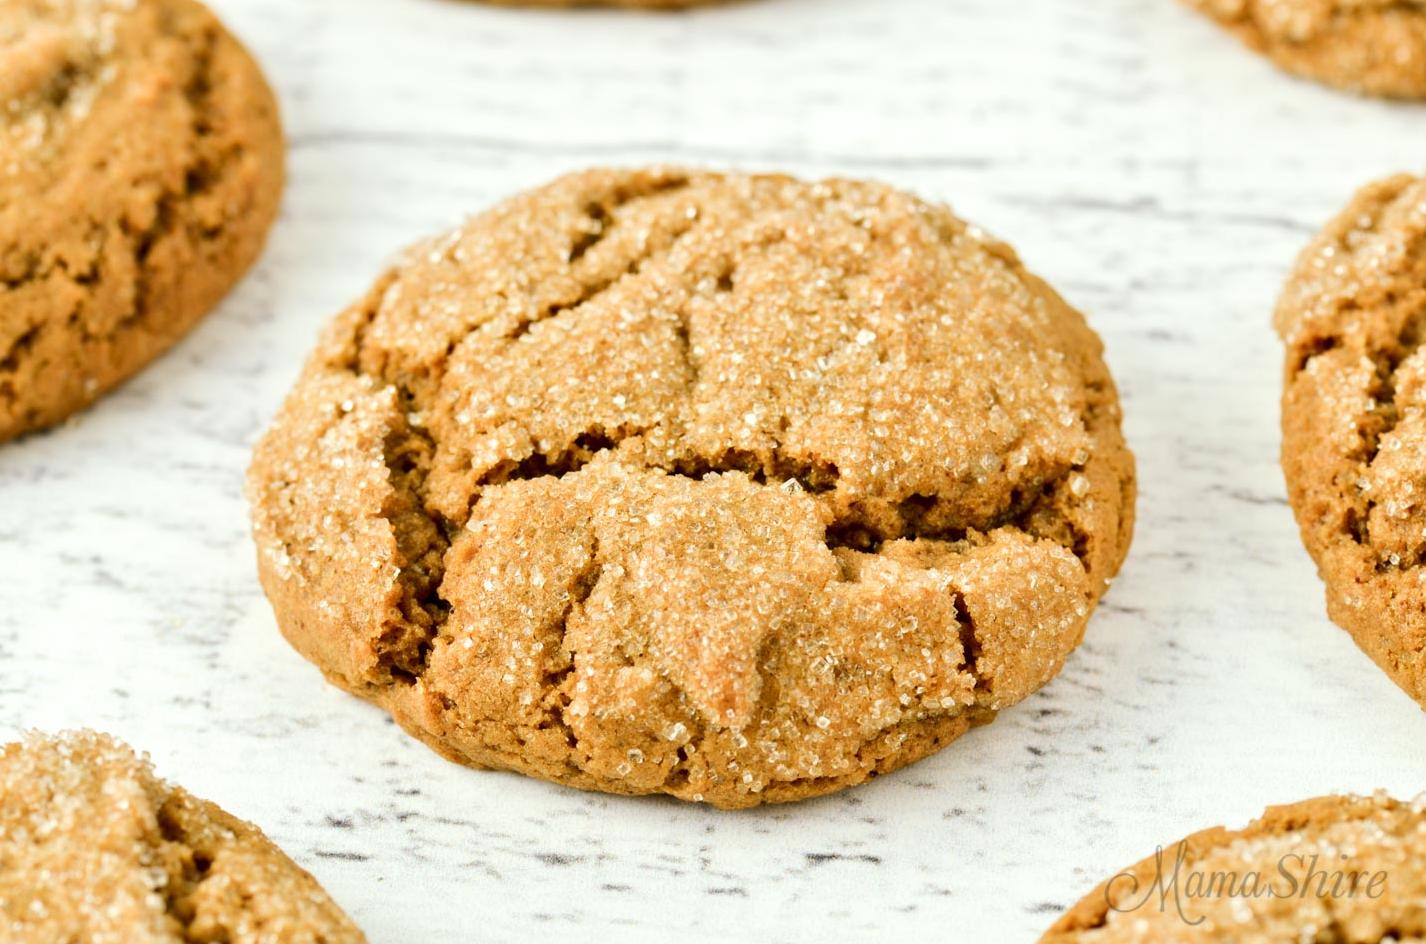  These cookies are a great way to indulge without sacrificing your dietary restrictions.